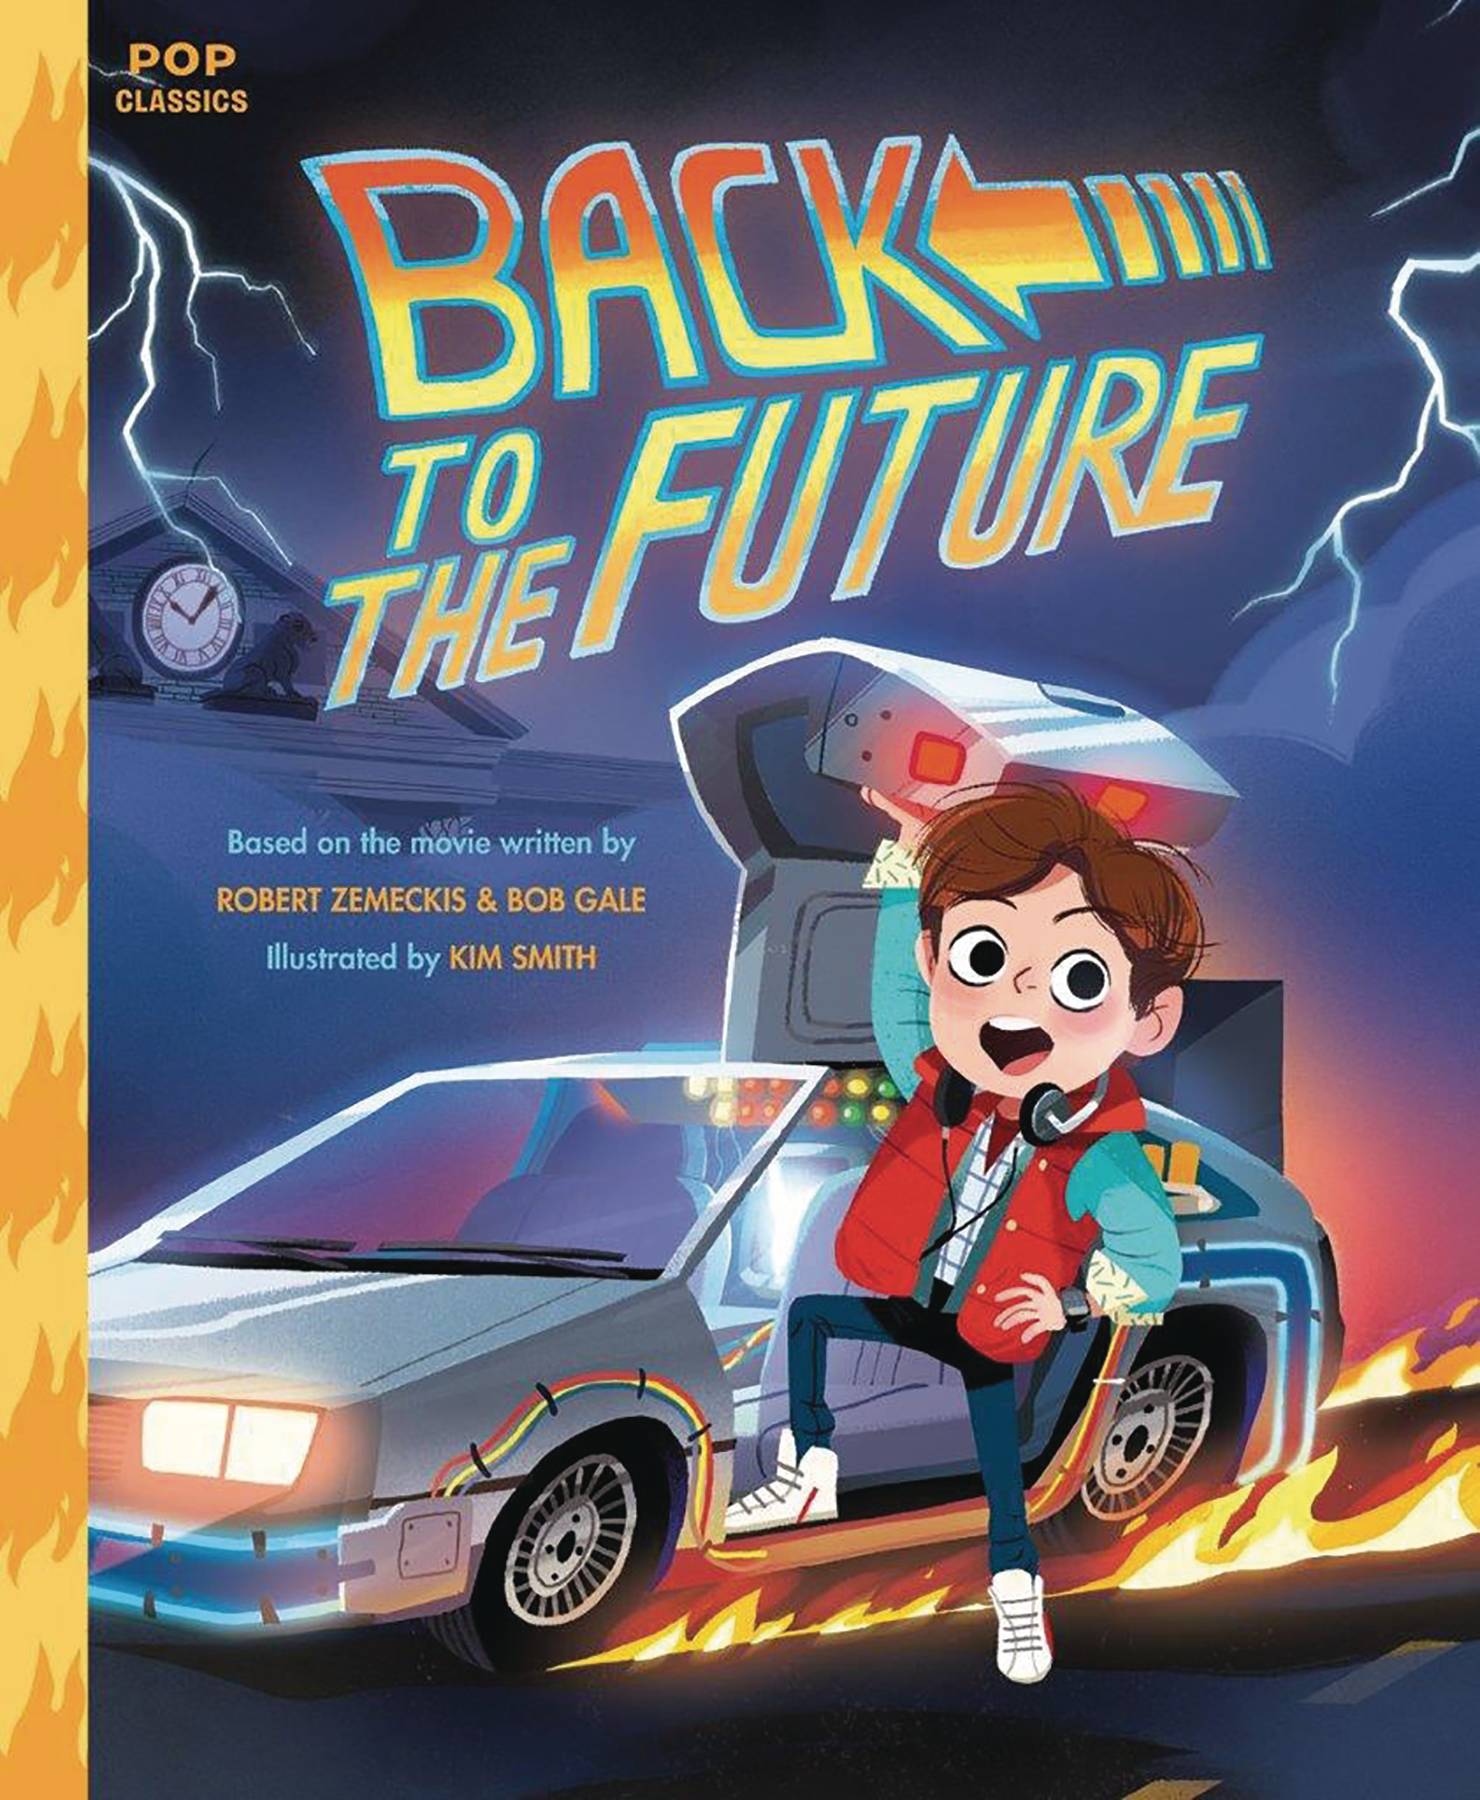 Back To the Future Pop Classic Illustrated Storybook Hardcover